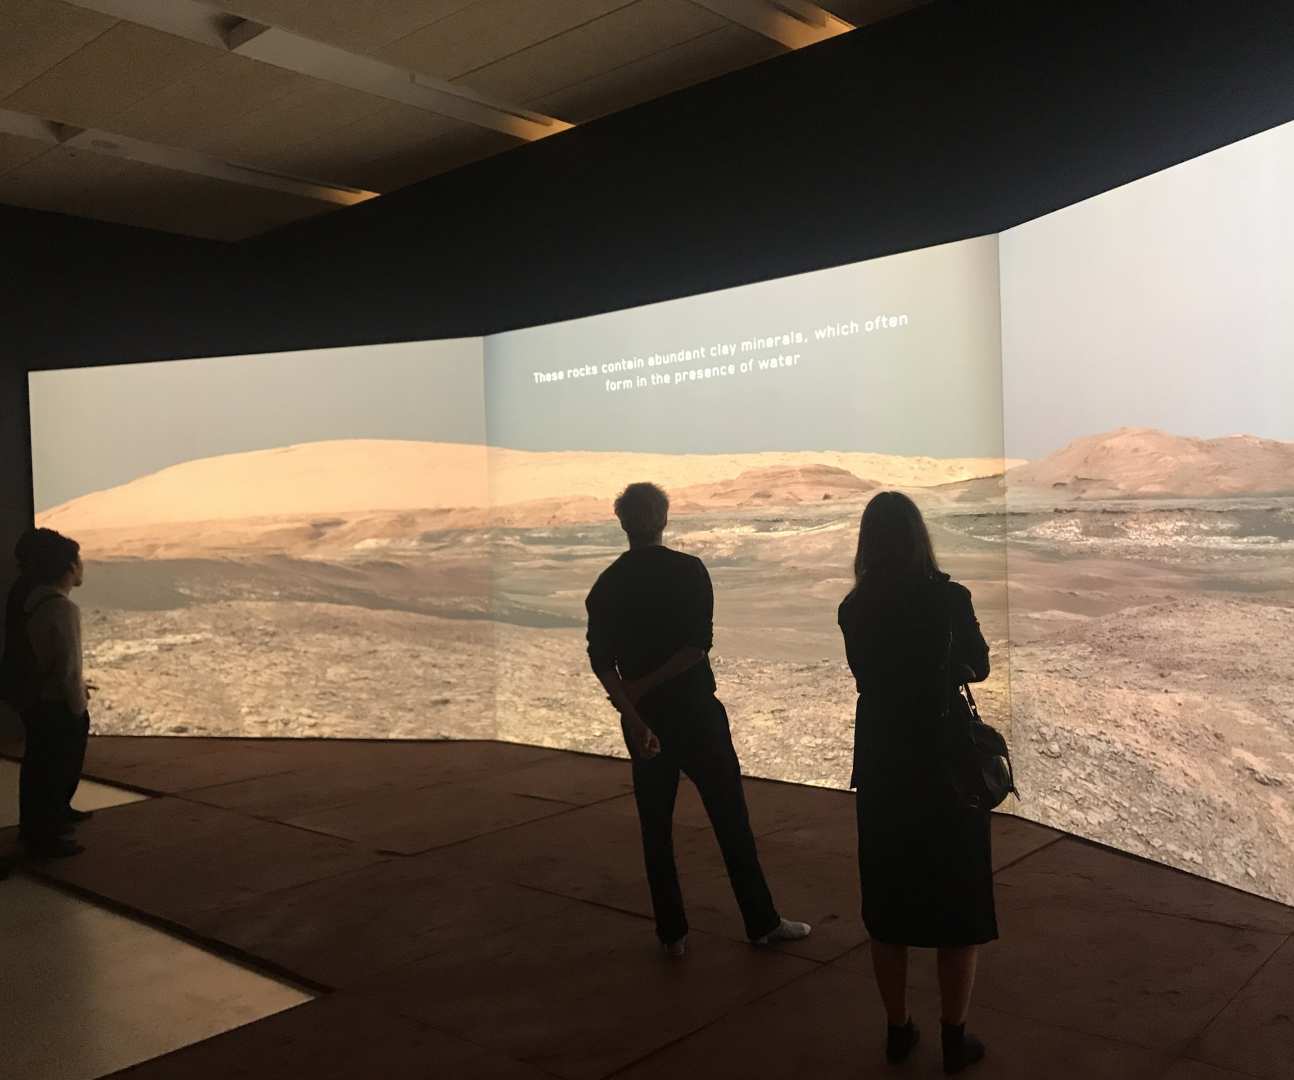 People looking at screen showing surface of Mars